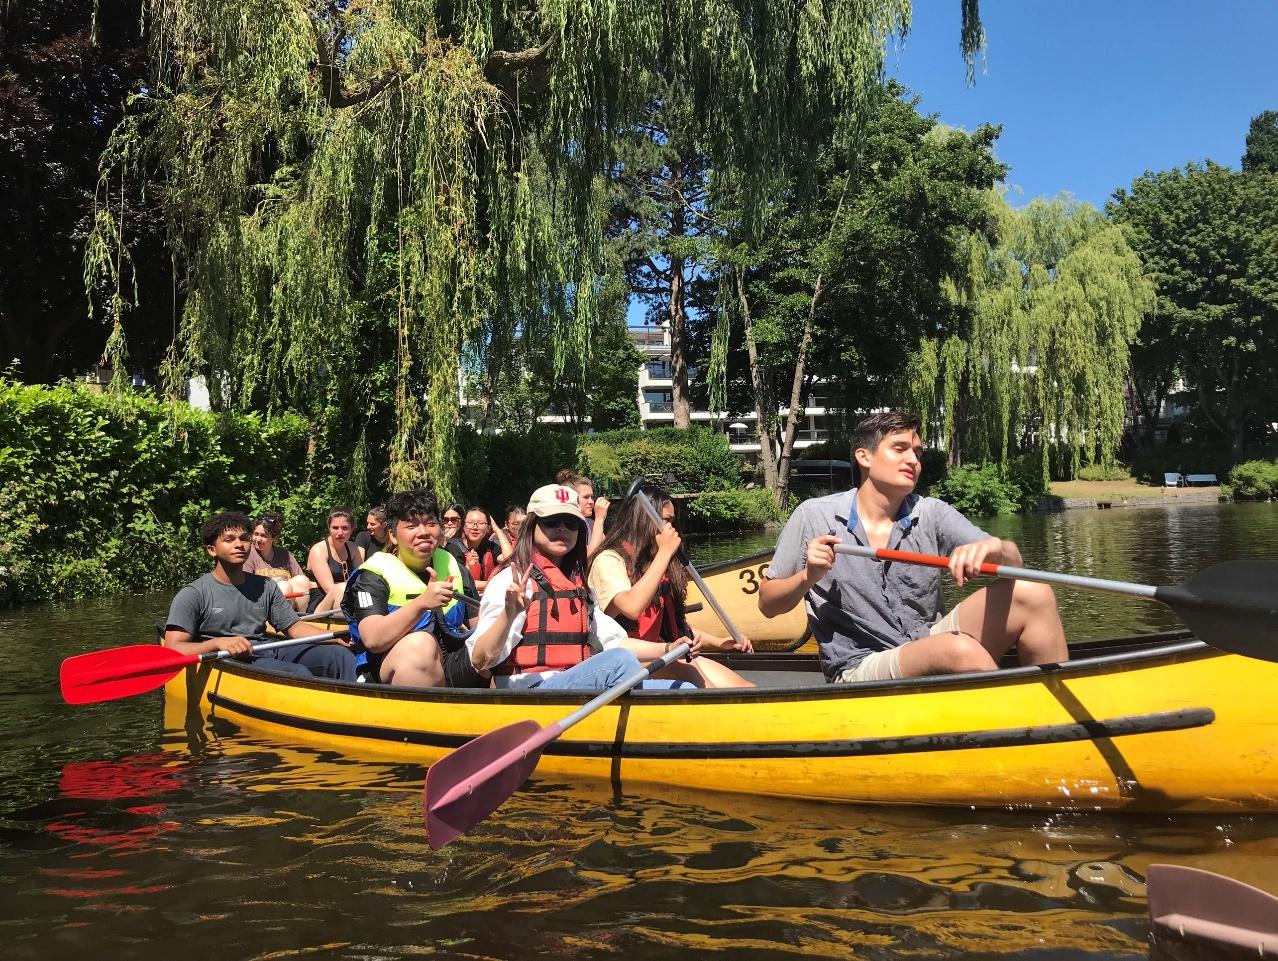 A group of people in a canoe</p>
<p>Description automatically generated with medium confidence